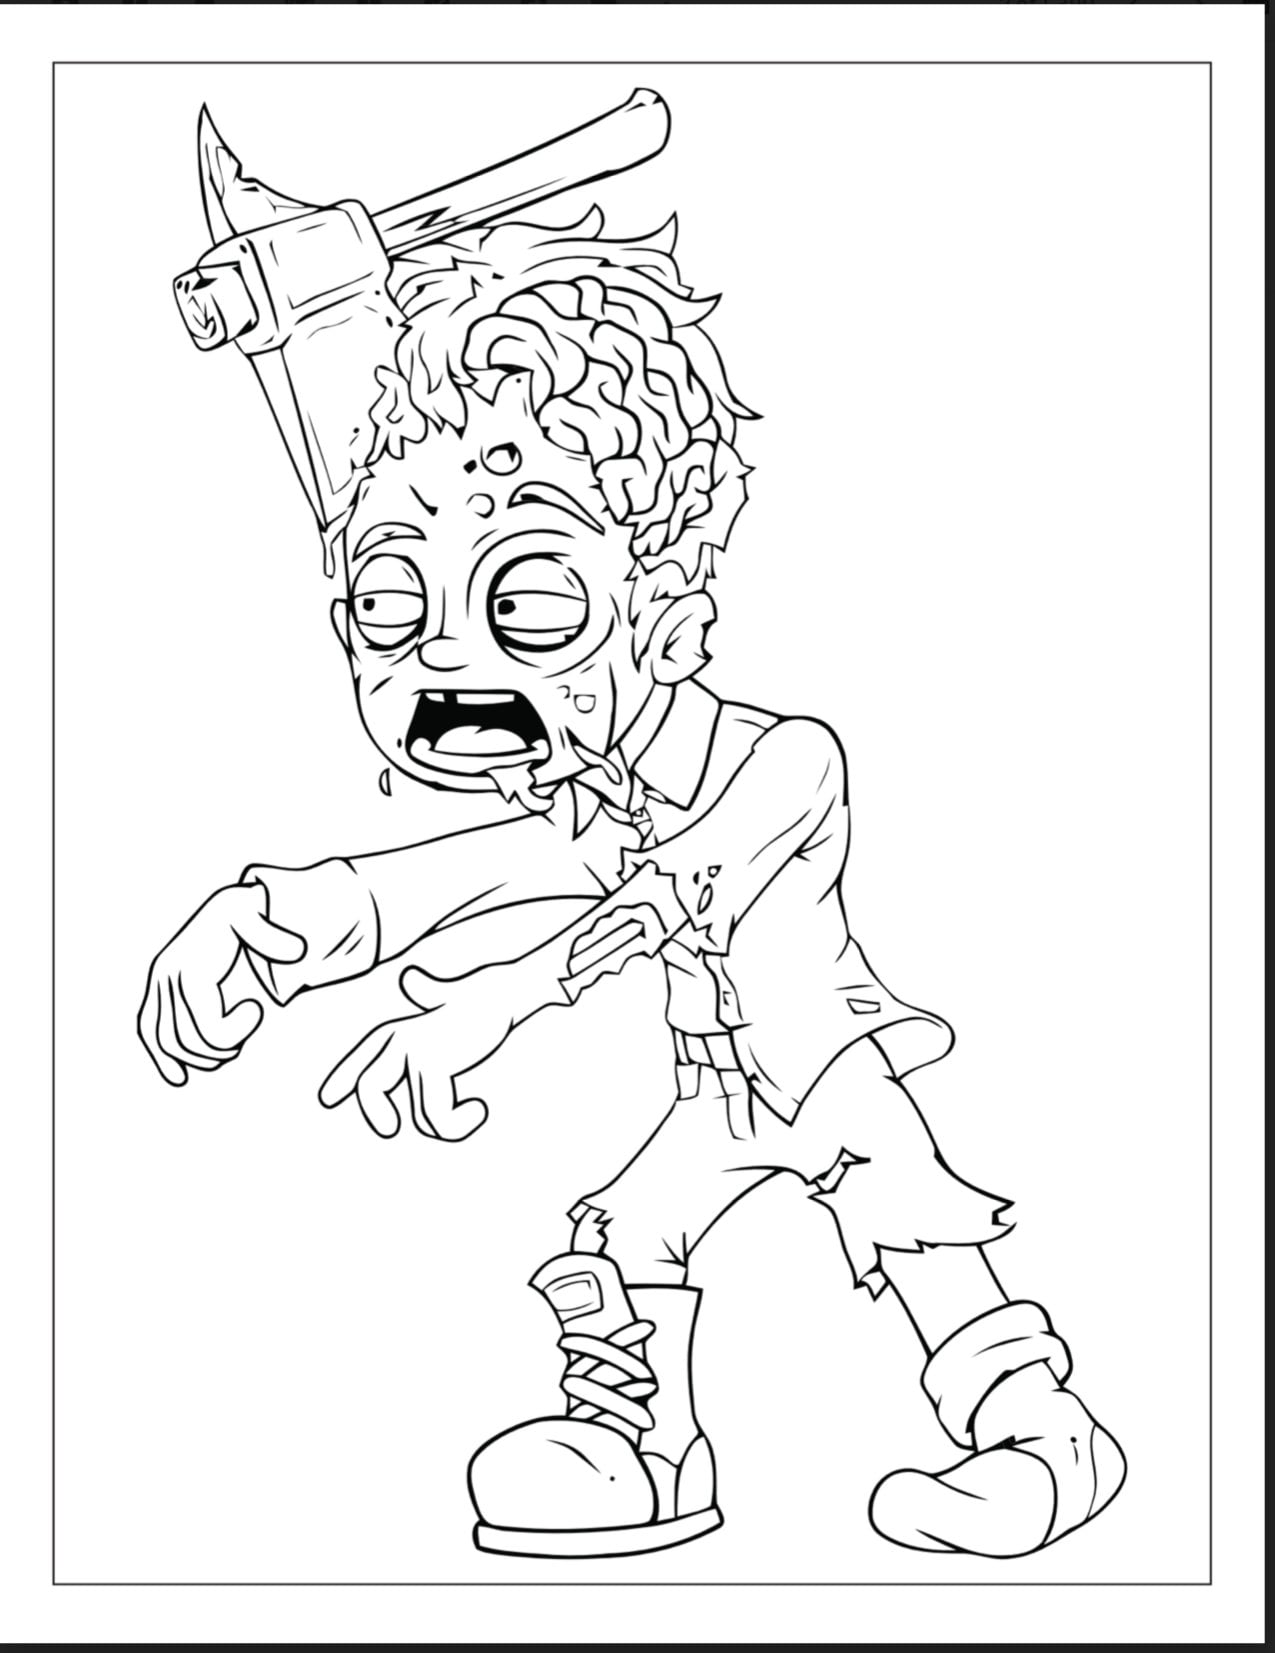 Adult zombie coloring pages